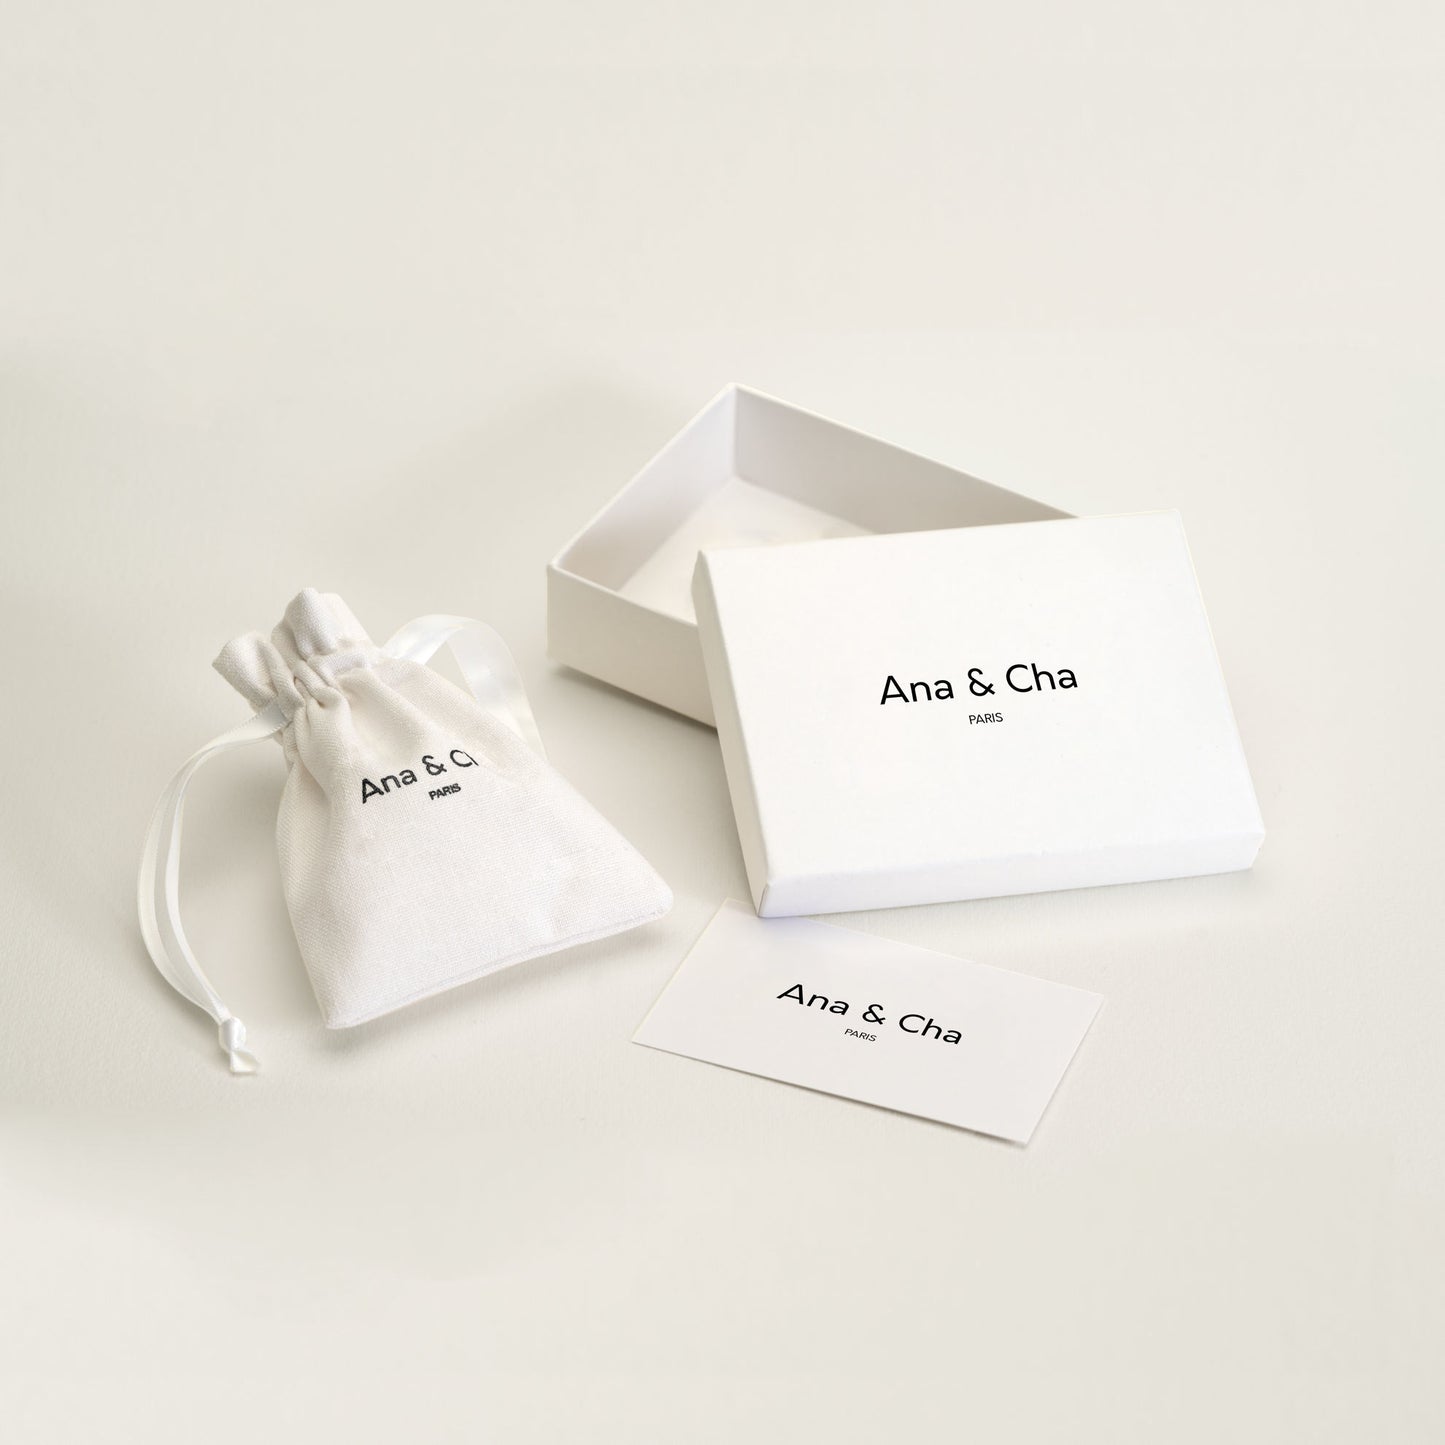 Ania - Gold Plated Ring - Ana et Cha